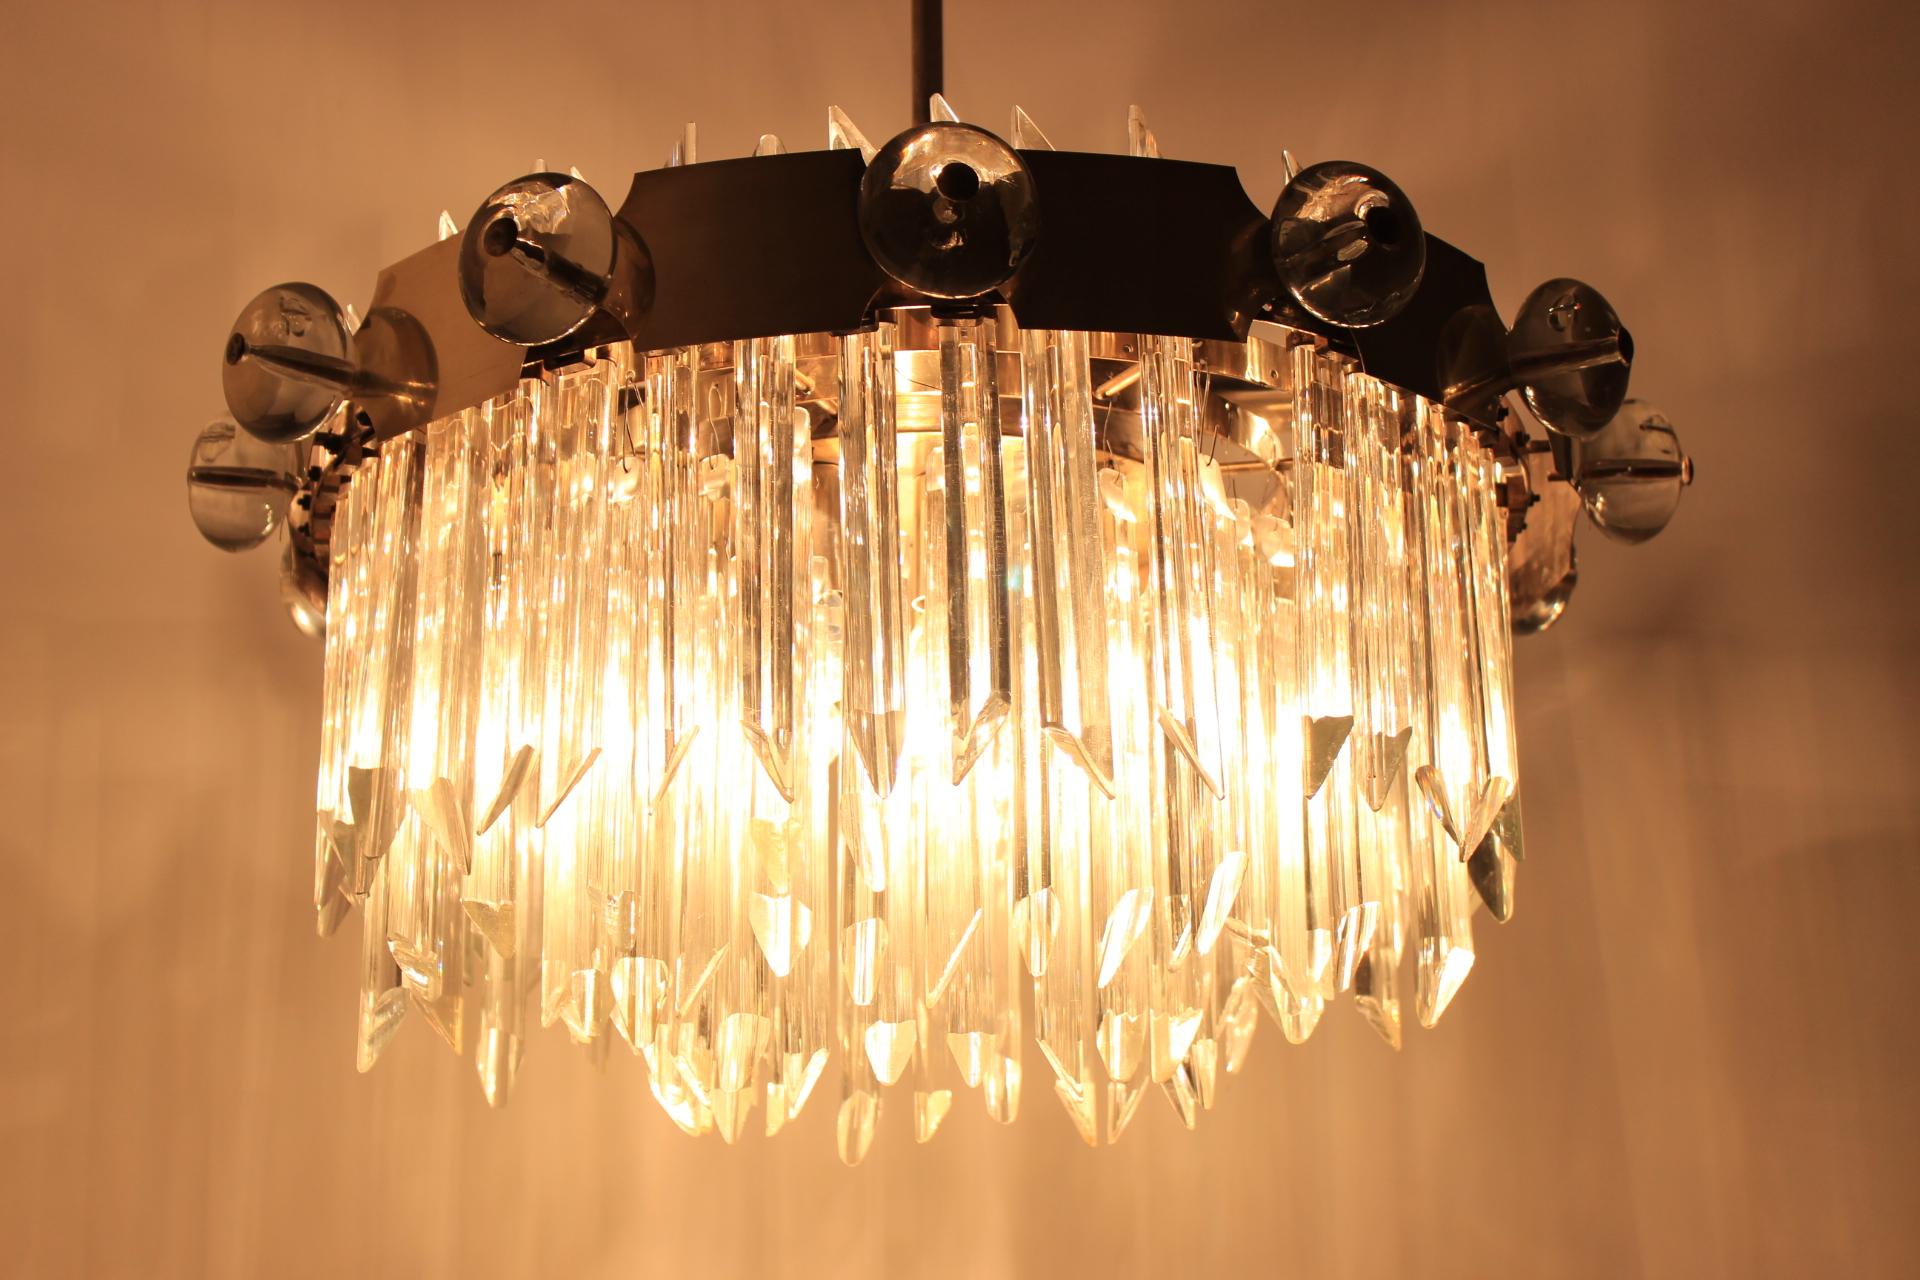 - Huge chandelier 
- Mid Century
- Very representative 
- Amazing style of lighting
- For 14 bulbs / 14 flaming
- Very much of pendants from crystal glass
- Several original pendants are missing, can be done if interested
- From the hotel in the